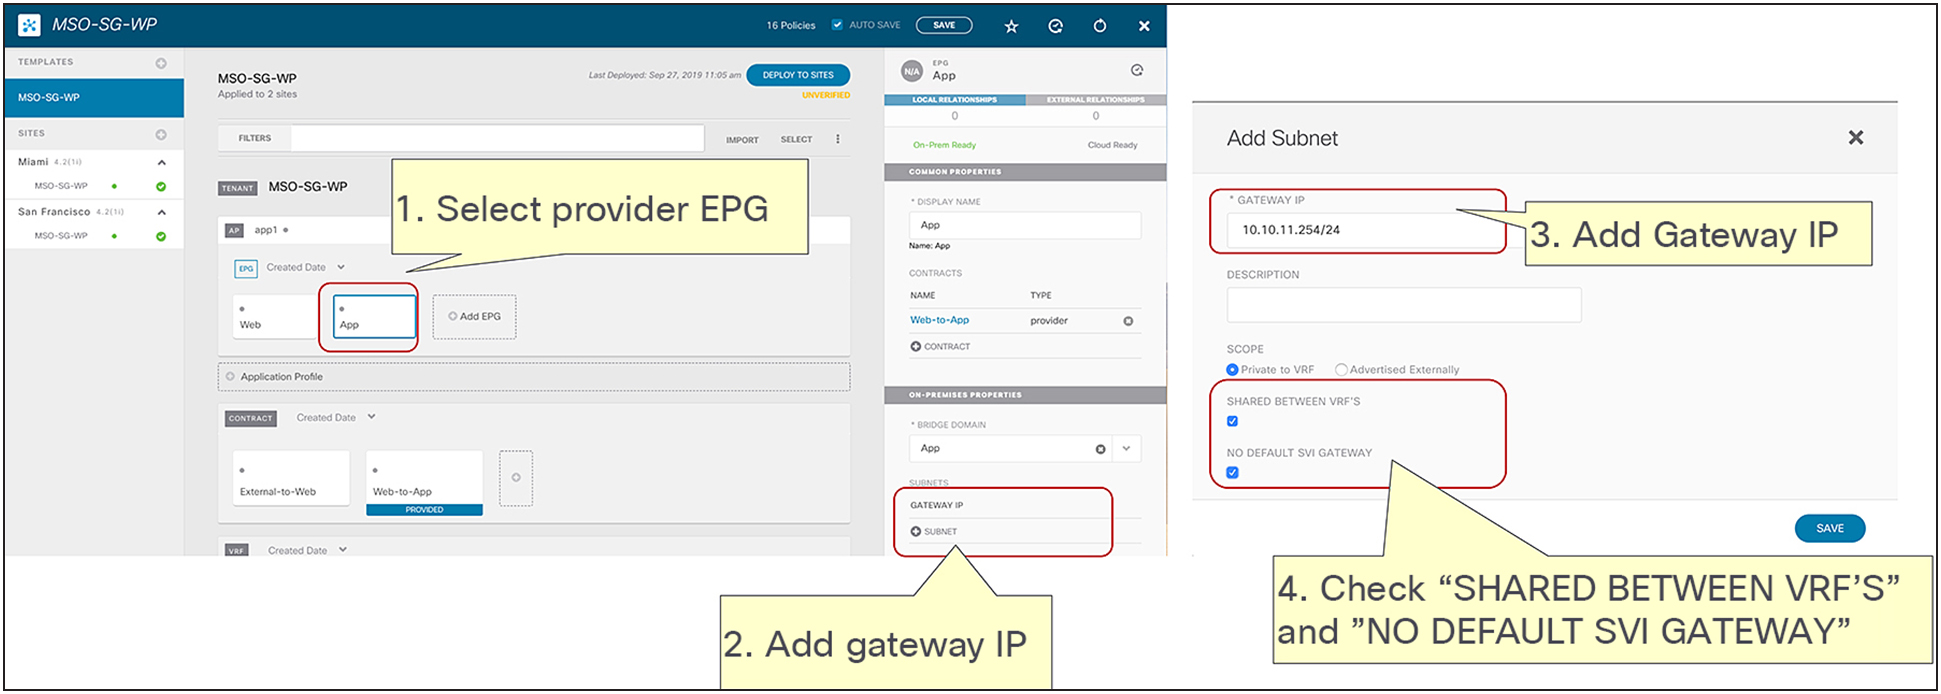 Consumer and provider EPG subnet options (MSO-template level)